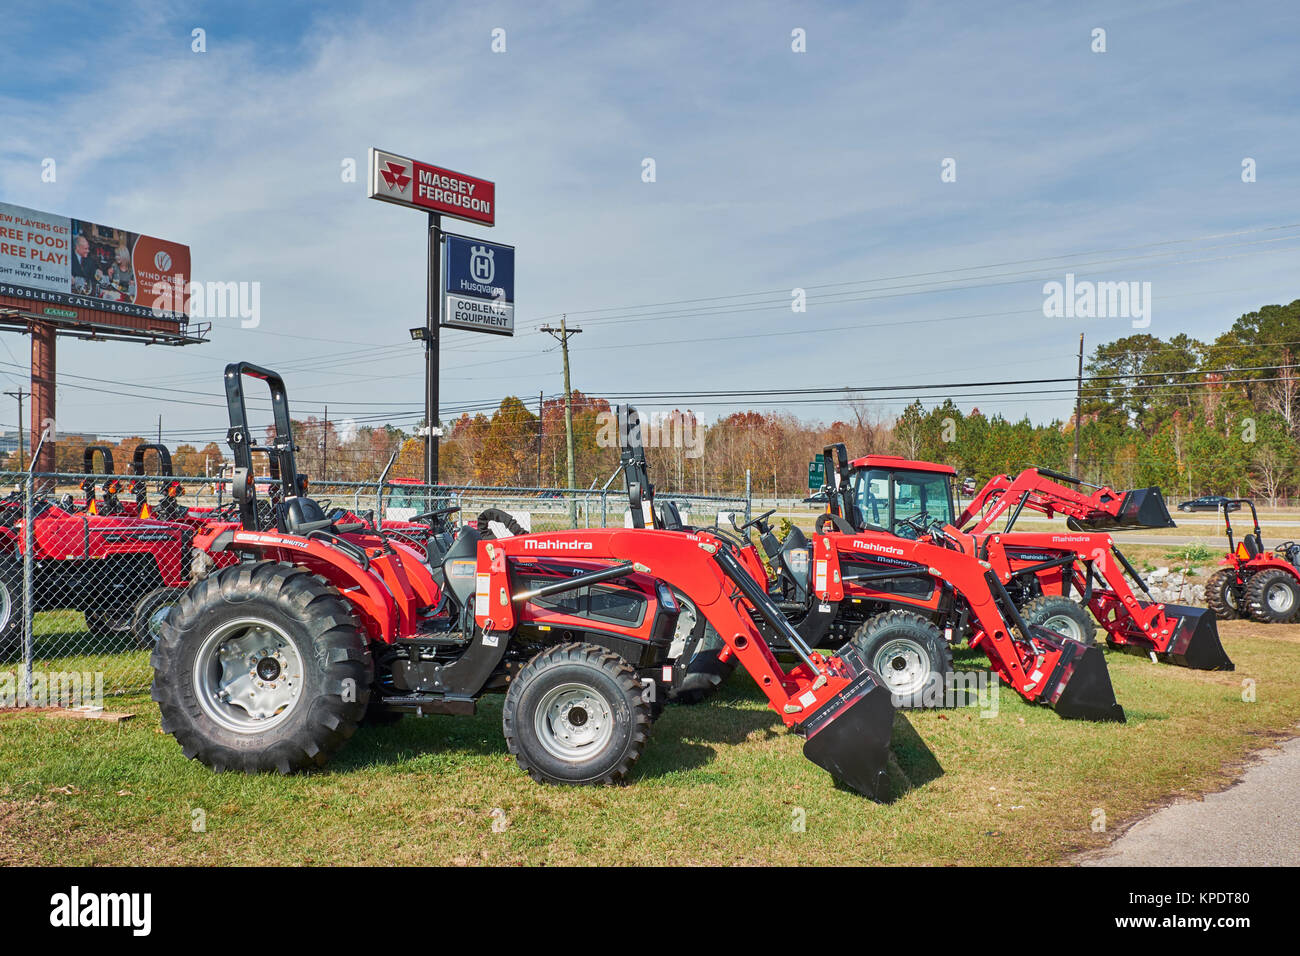 Rows of new Mahindra red tractors and farm equipment for sale at a Mahindra tractor dealership, some with optional equipment. Stock Photo